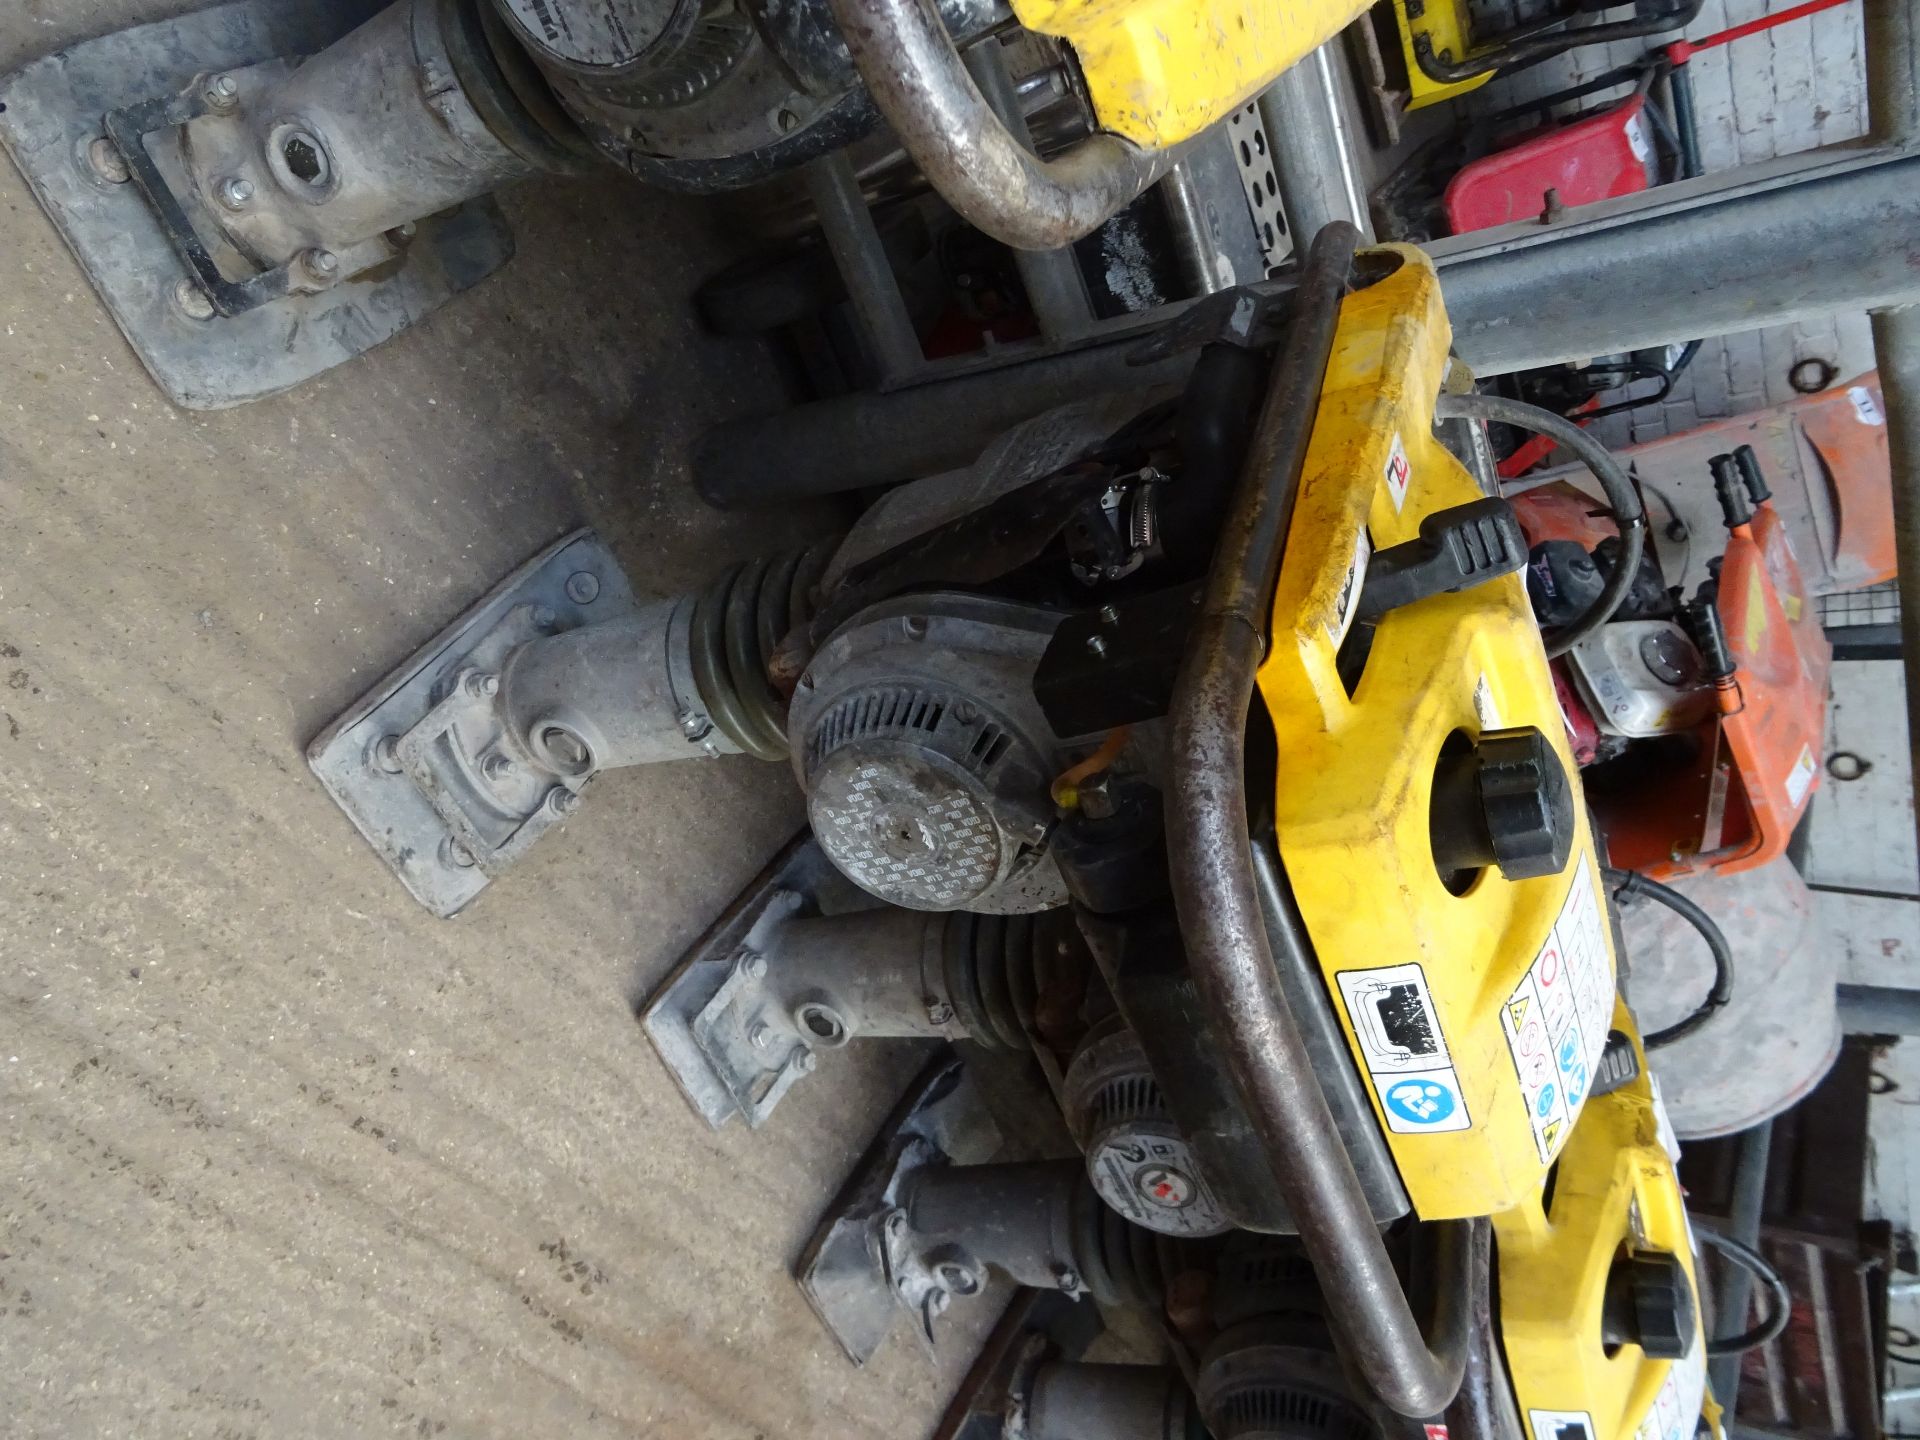 Yellow top upright rammer